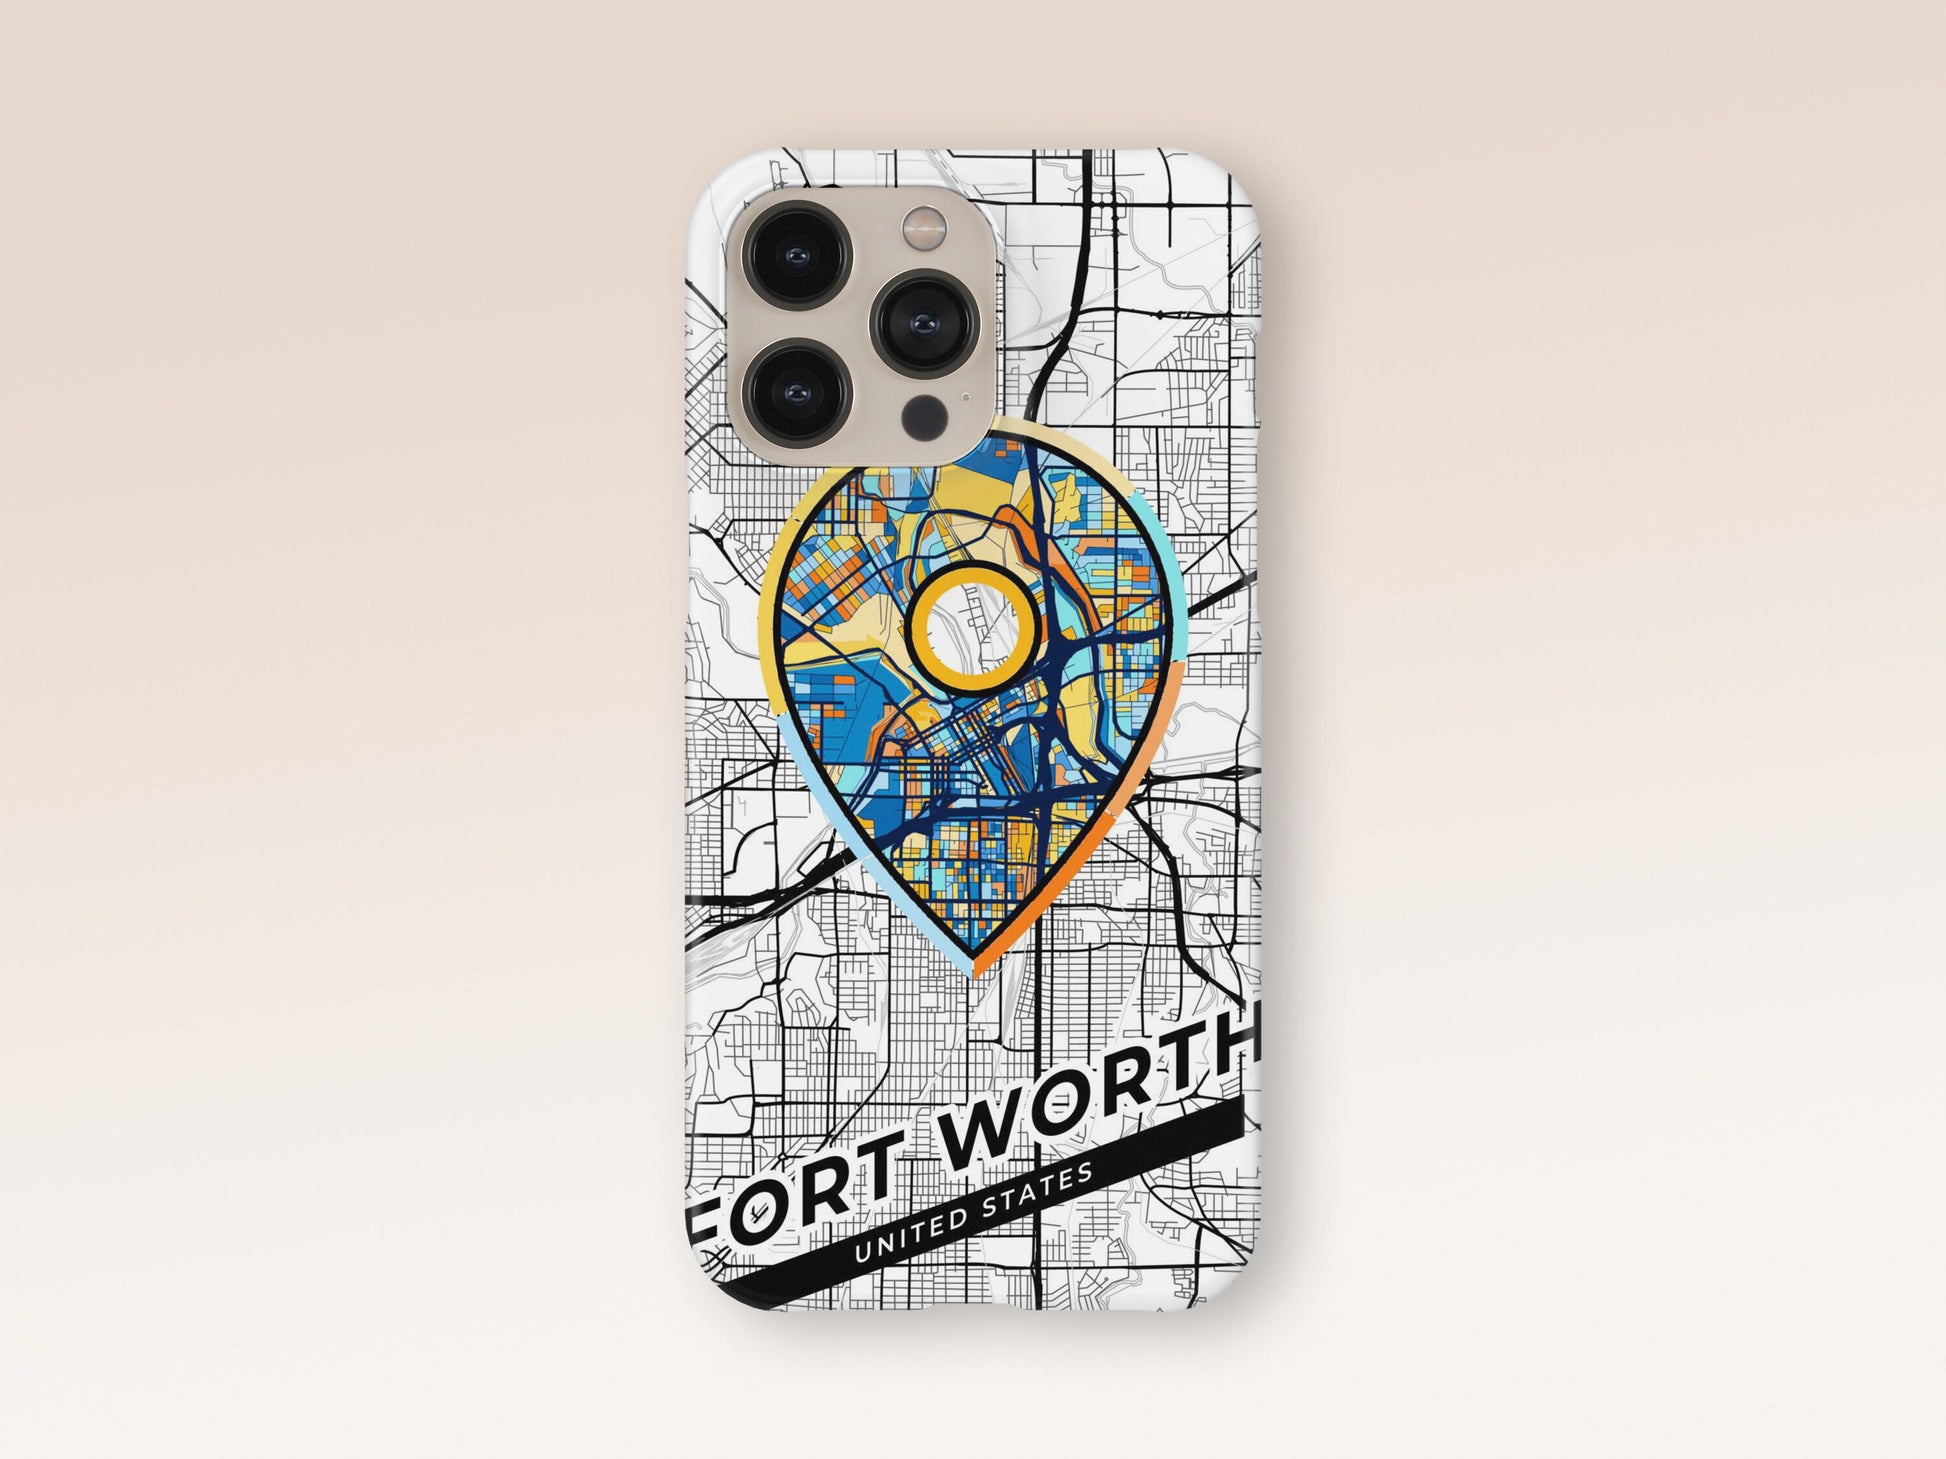 Fort Worth Texas slim phone case with colorful icon. Birthday, wedding or housewarming gift. Couple match cases. 1